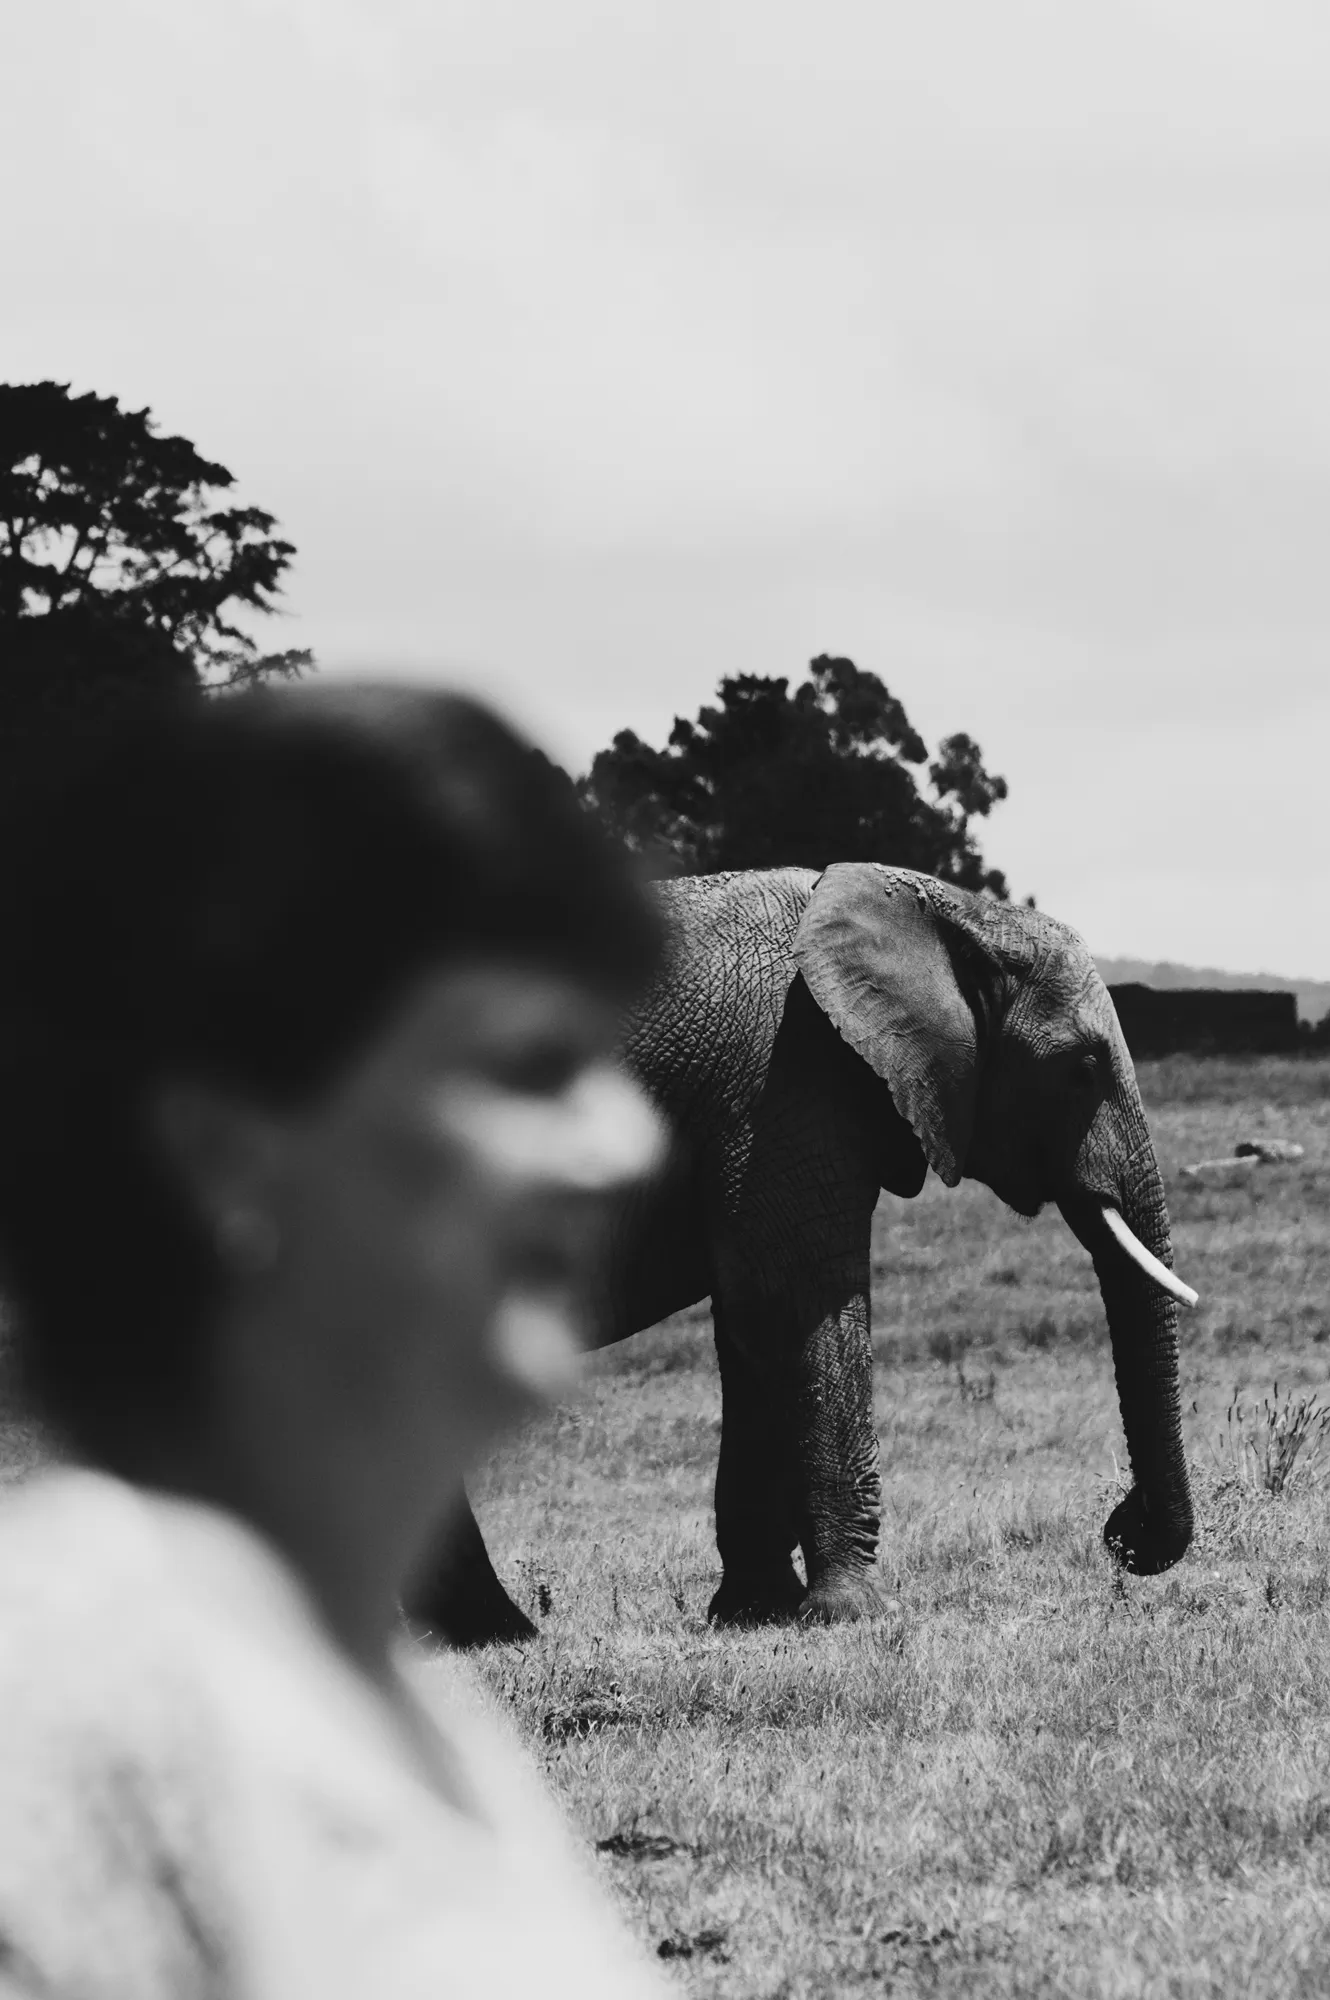 2018-12-24 - Knysna Elephant Park, Knysna - Out-of-focus person with elephant in background